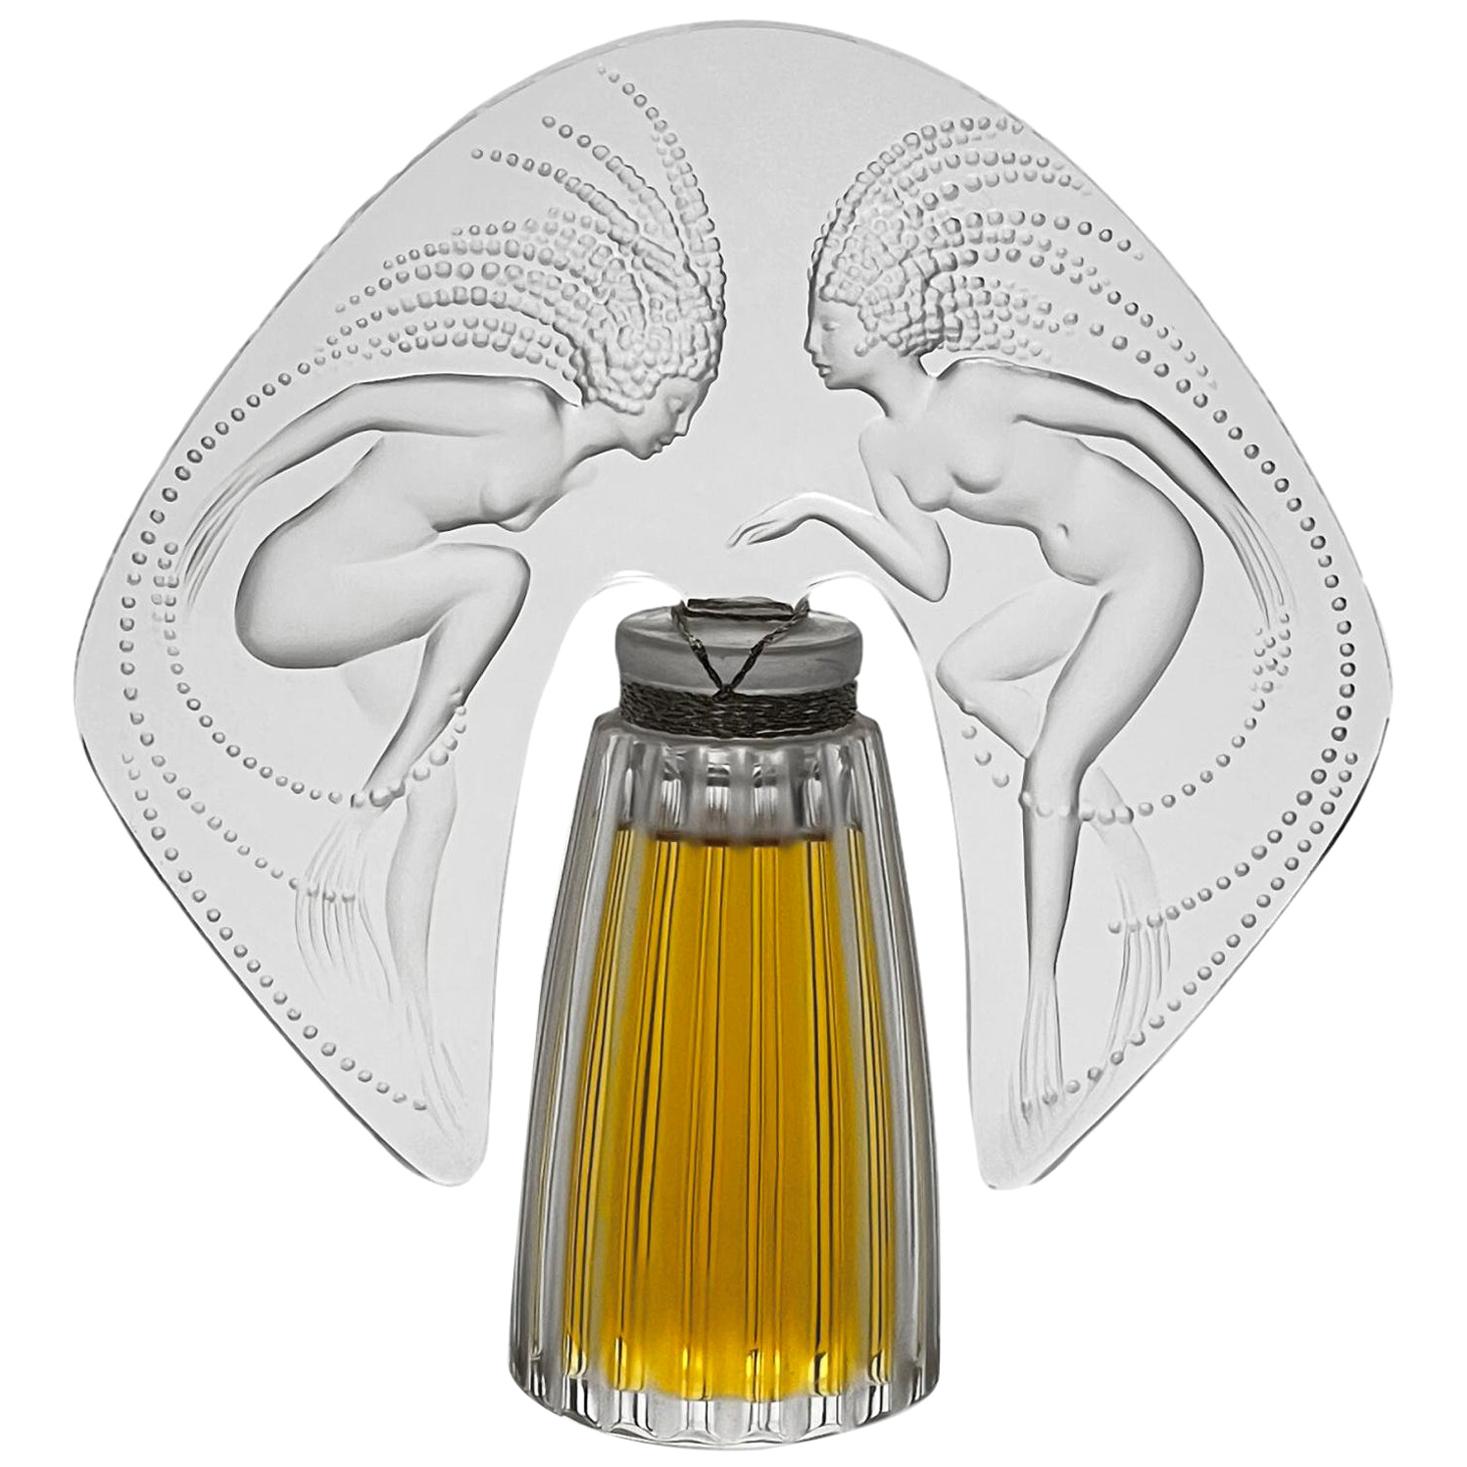 Limited Edition "Ondines" Perfume Bottle by Marie-Claude Lalique